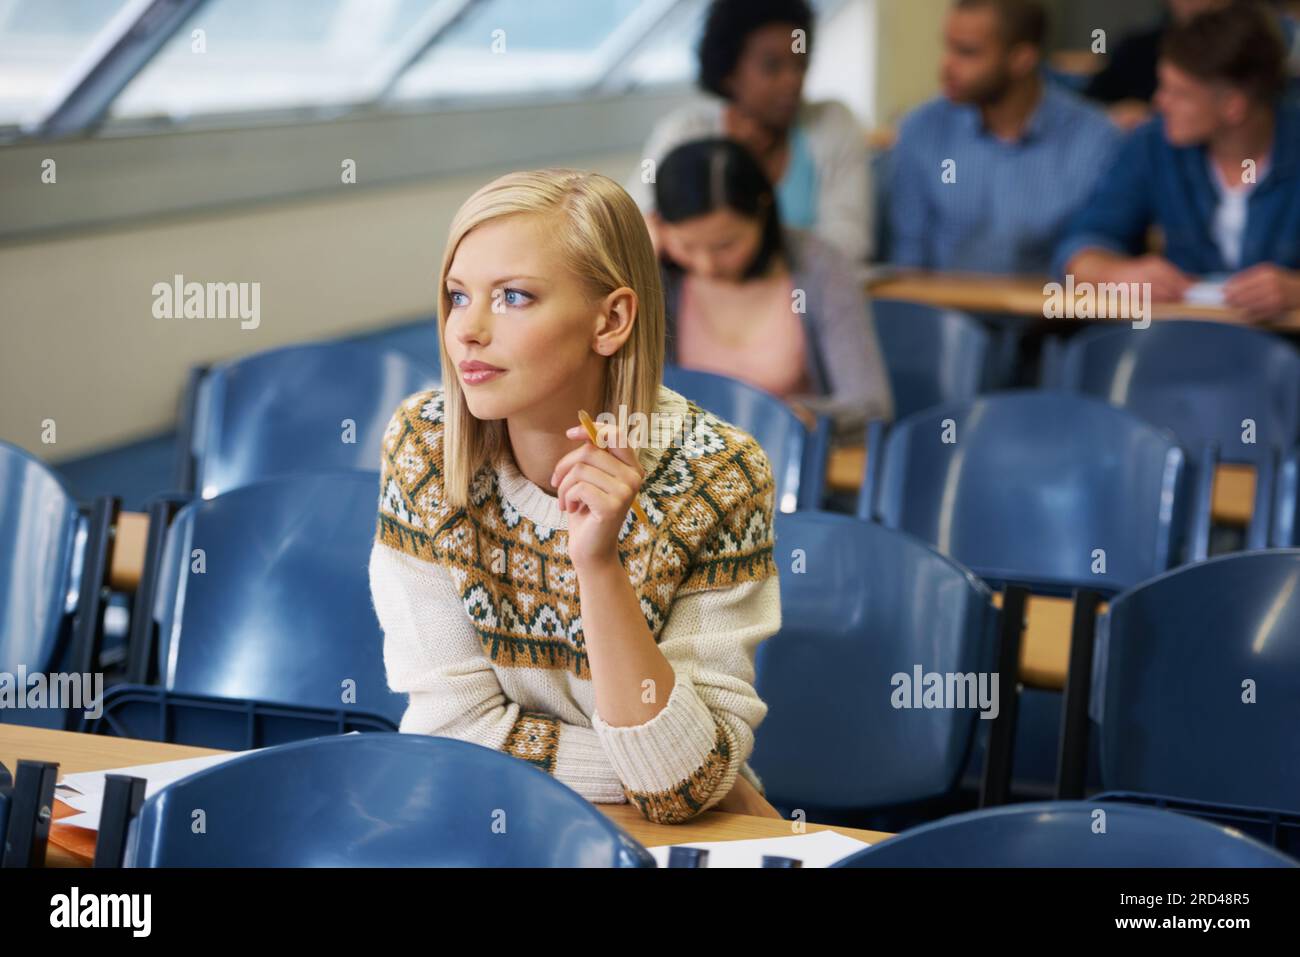 The last exam before the real world begins. A group of students sitting in an exam room. Stock Photo